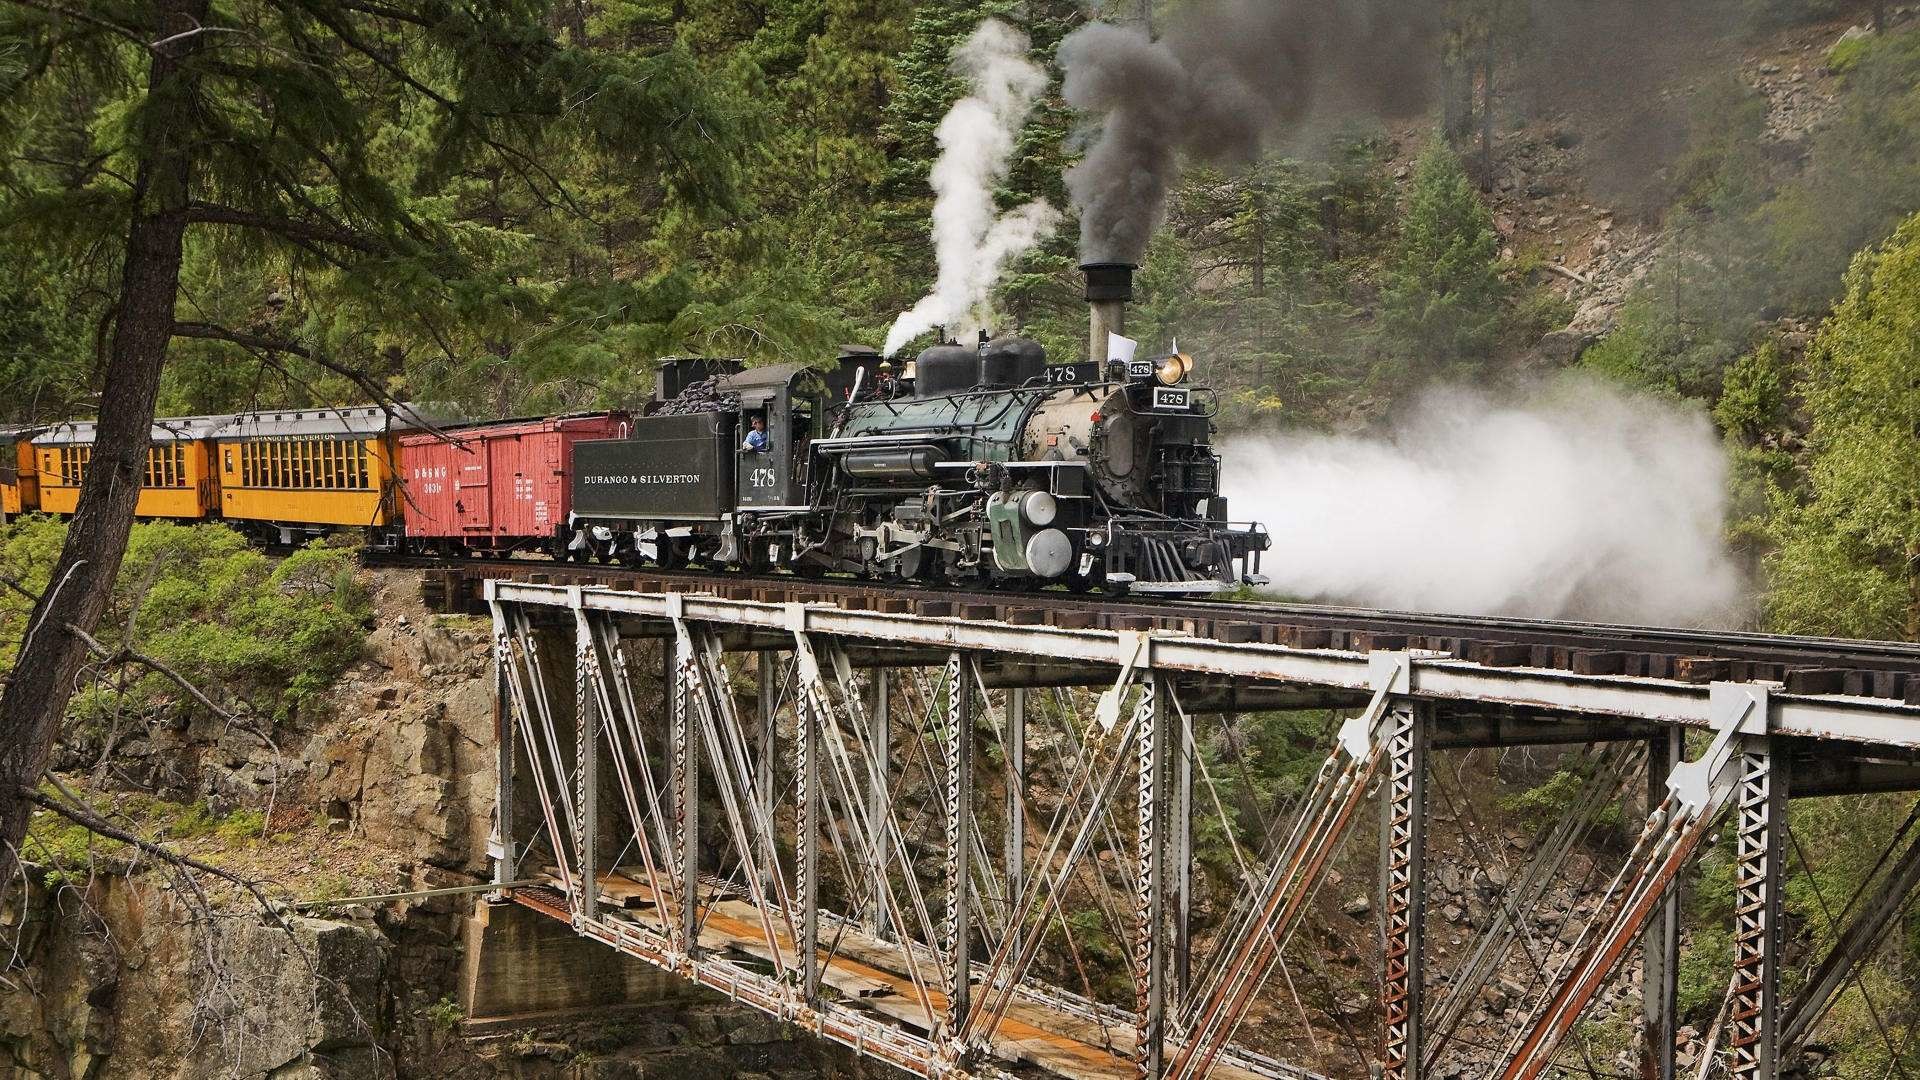 Colorado Steamtrain over Bridge HD Wallpaper in Full HD from the Trains  category.